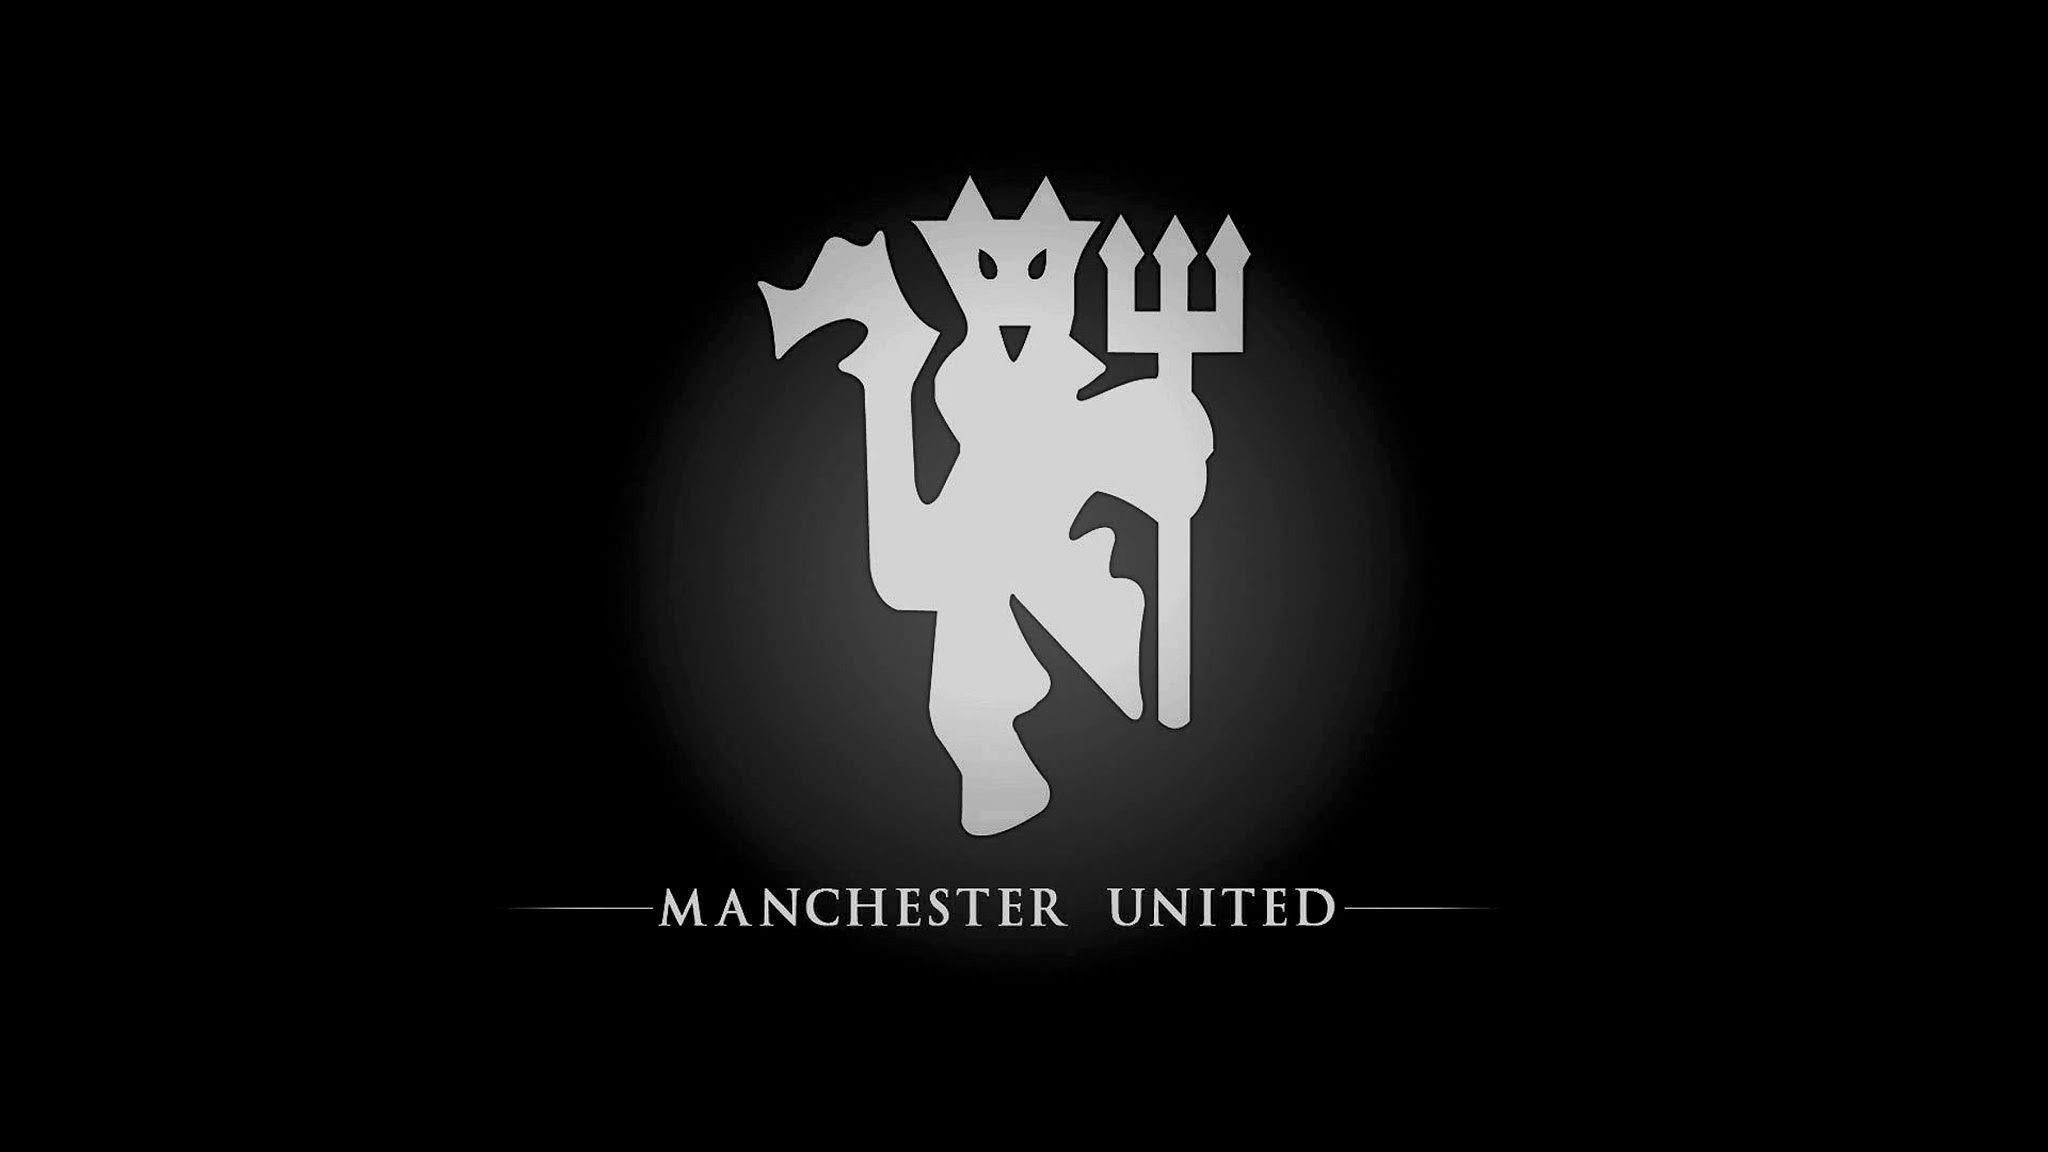 2048x1152 Manchester United Hd Wallpapers 2022 88 Images Download Manchester 2048x1152